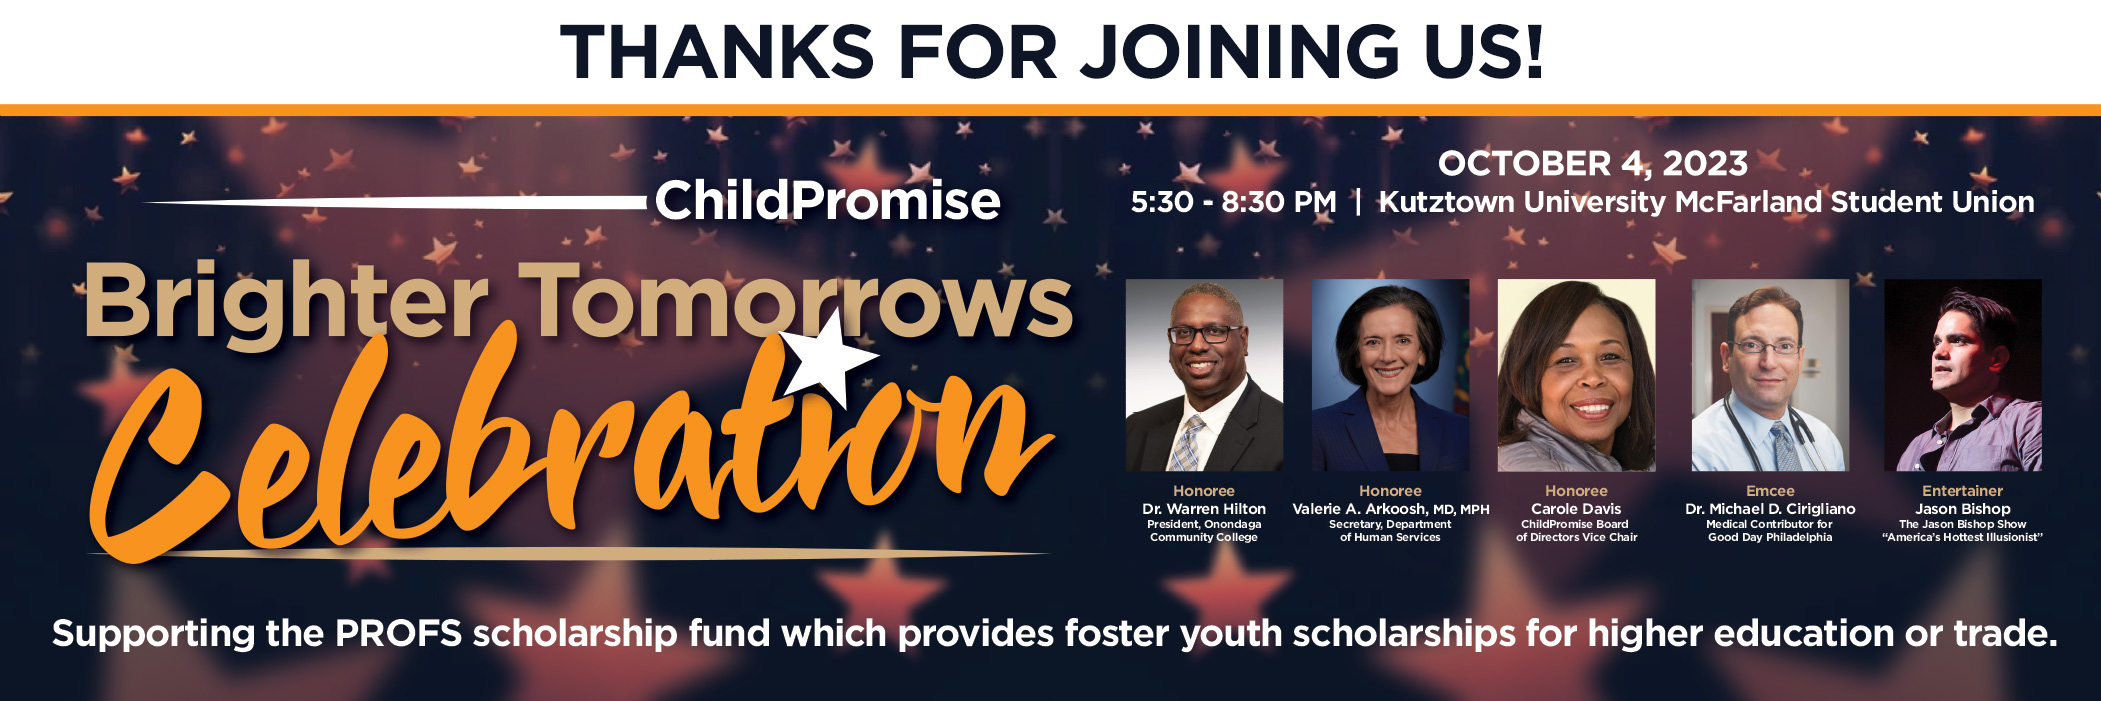 ChildPromise - Thanks for Joining Us!